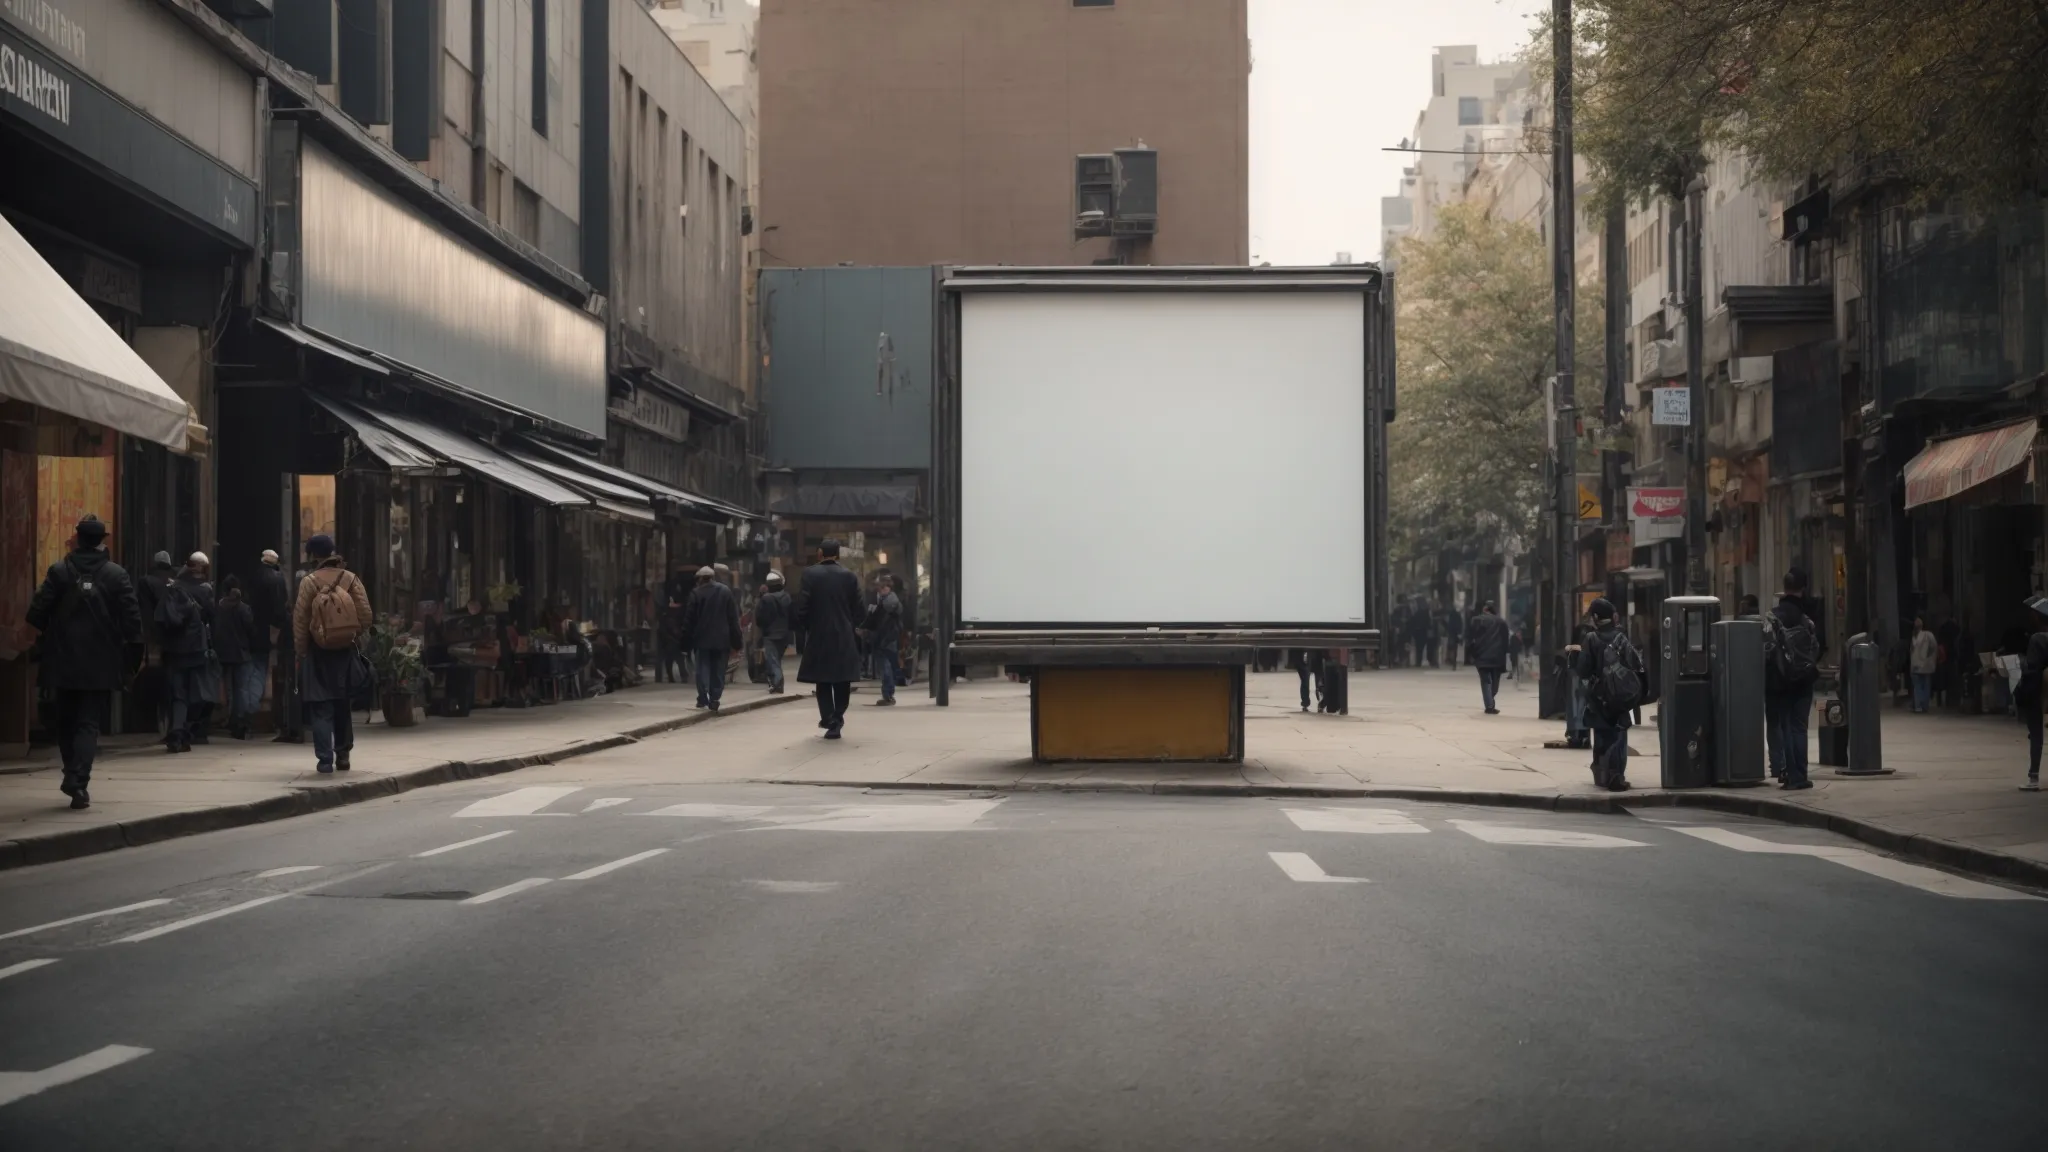 a blank billboard stands in the middle of a bustling street, untouched by advertisers and ignored by passersby.